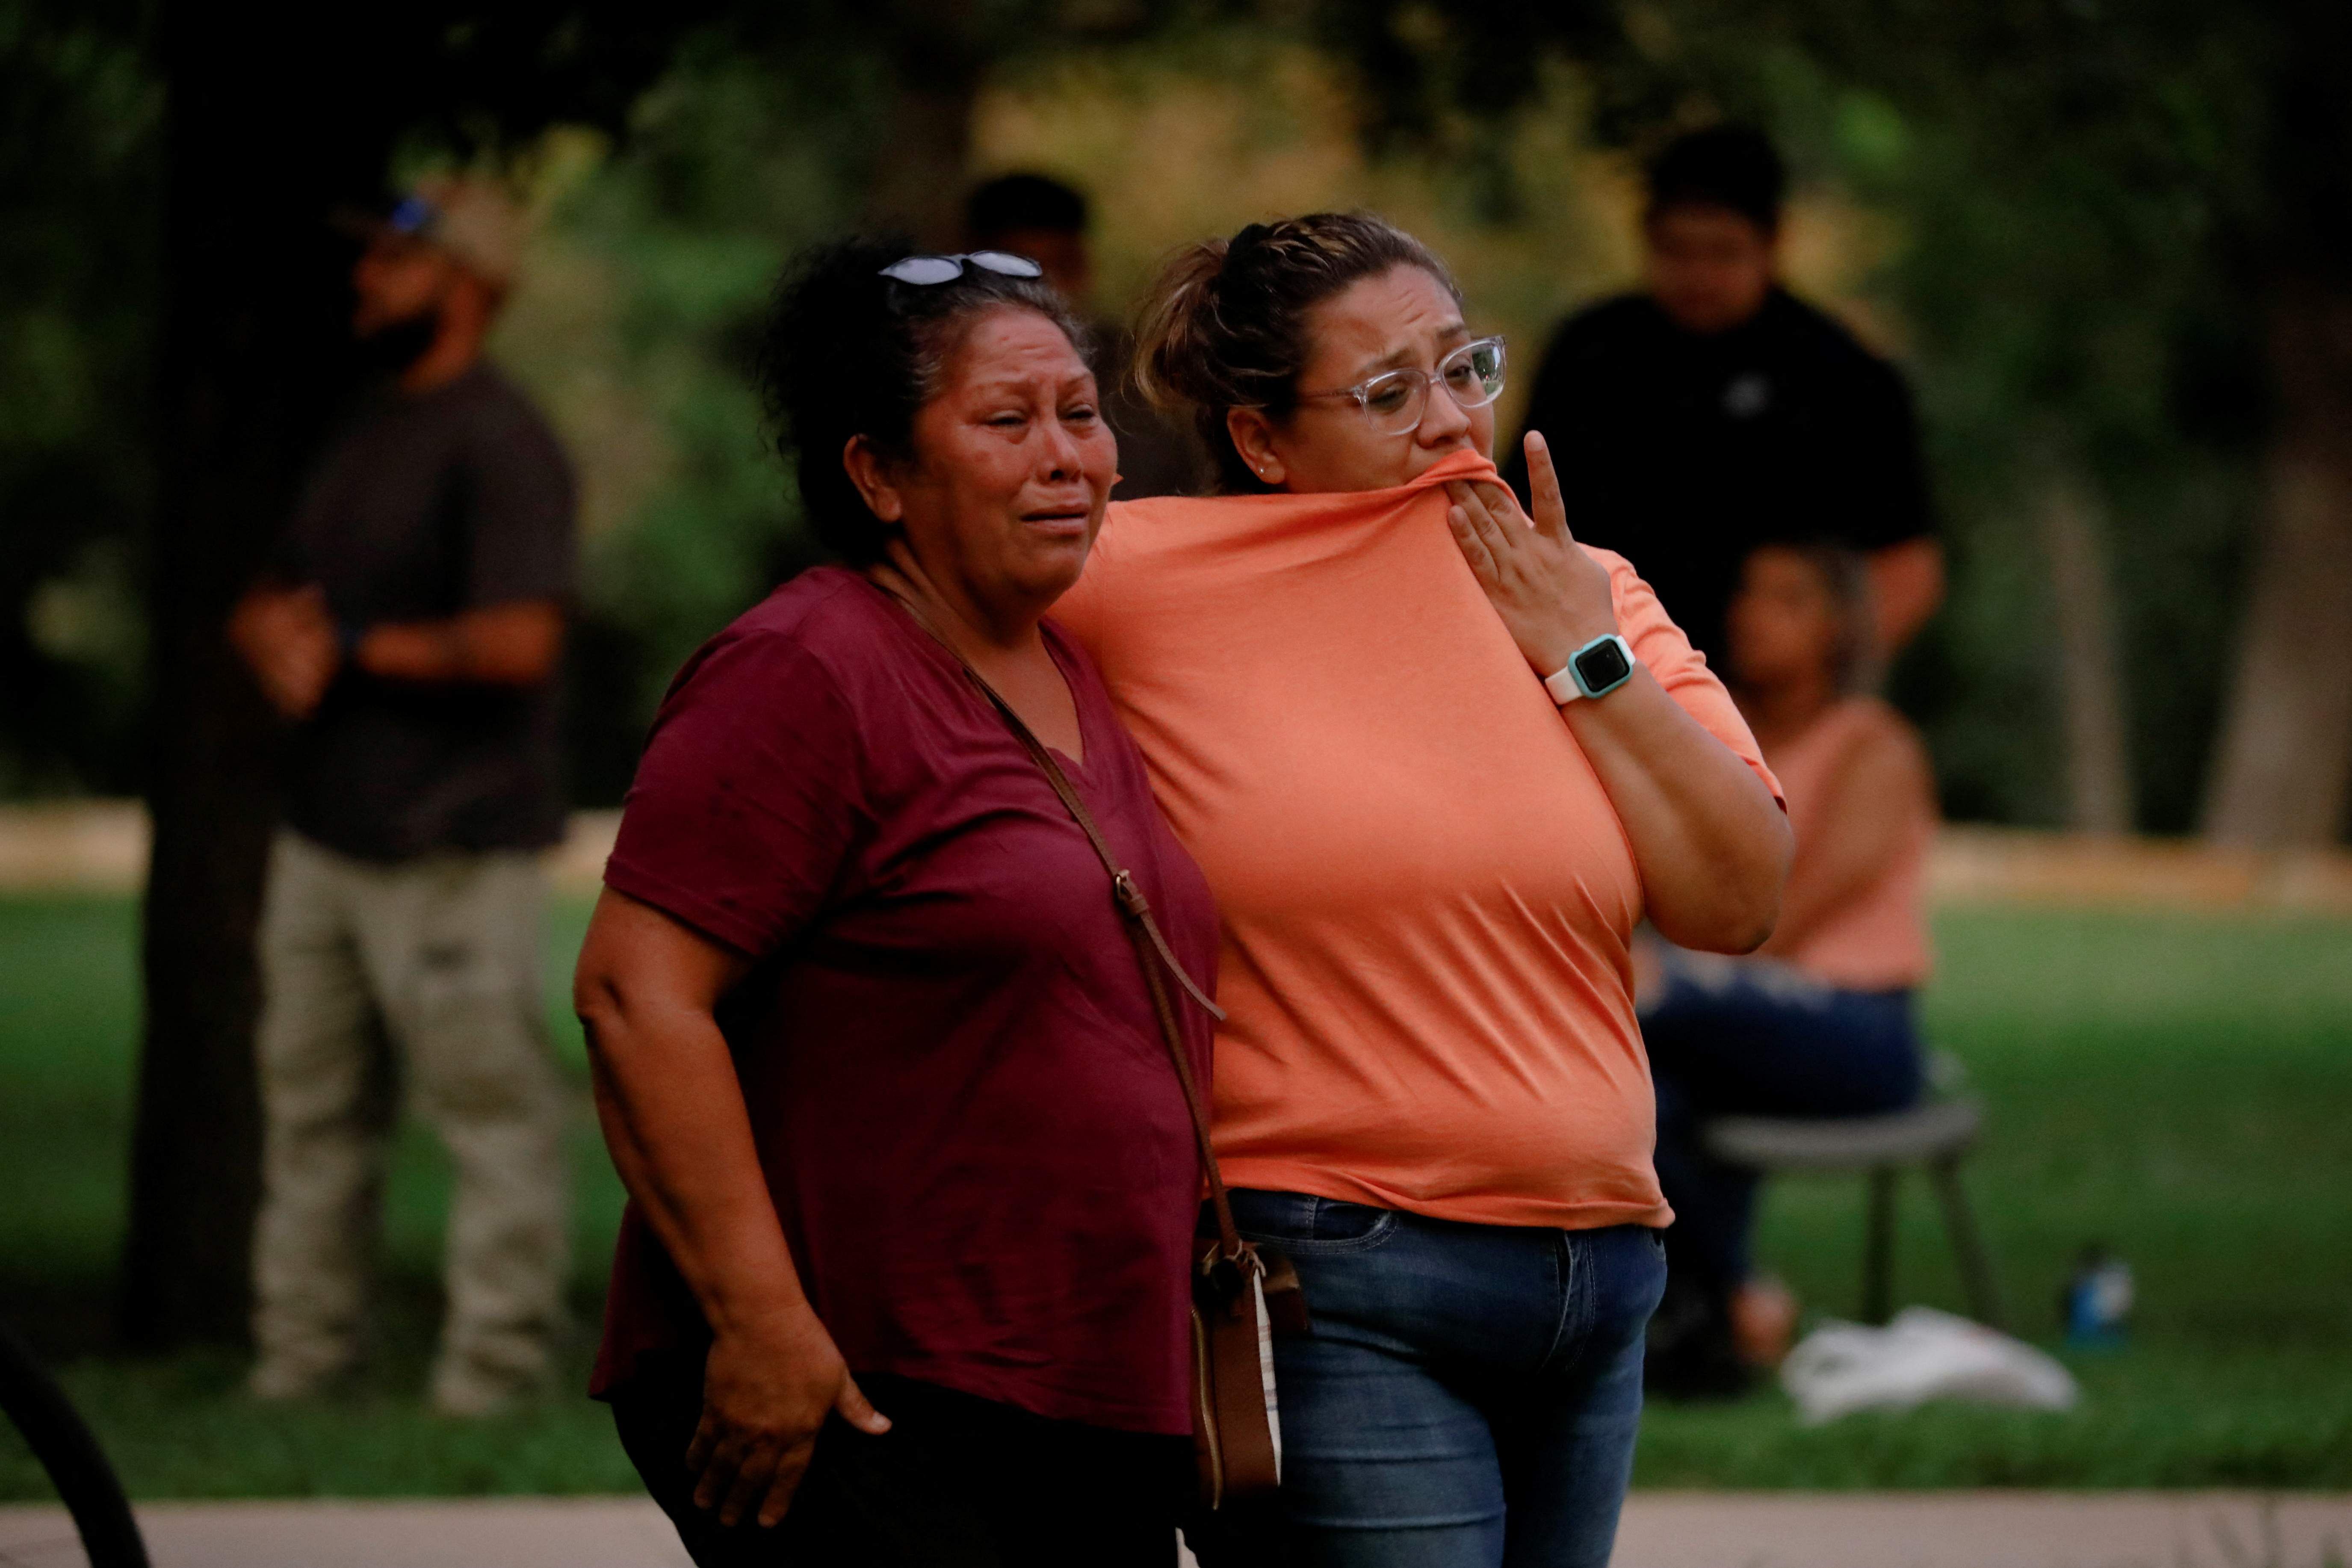 There were two days left in the school year when Tuesday's massacre unfolded. The school district canceled classes for the remainder of the school year and has established grief counseling for the survivors. Credit: Reuters Photo